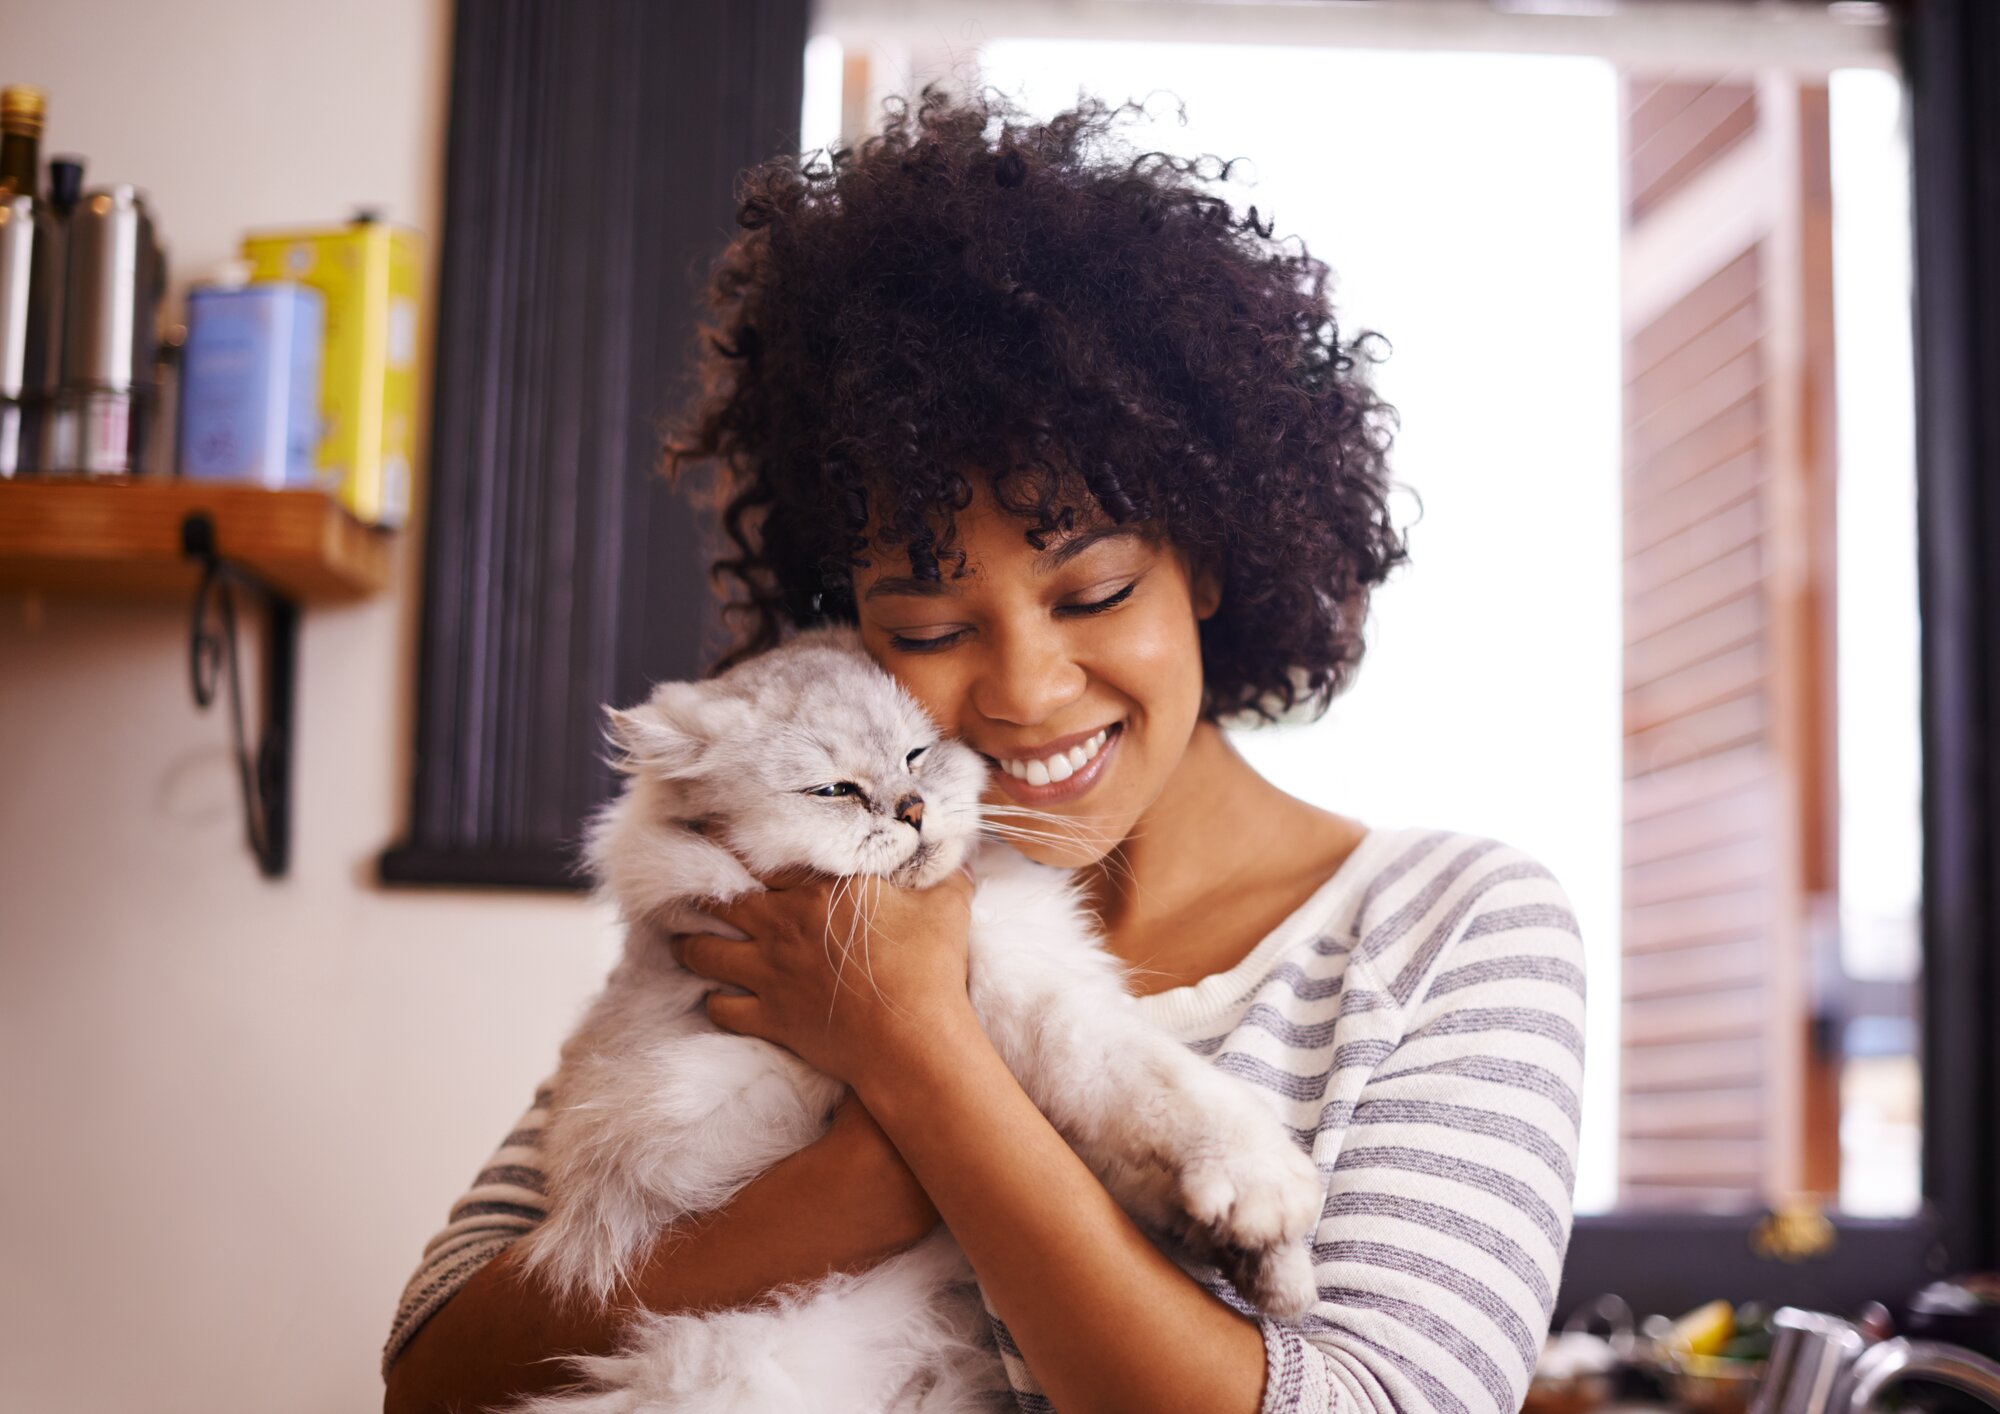 A young woman lovingly hugging her fluffy gray and white cat.